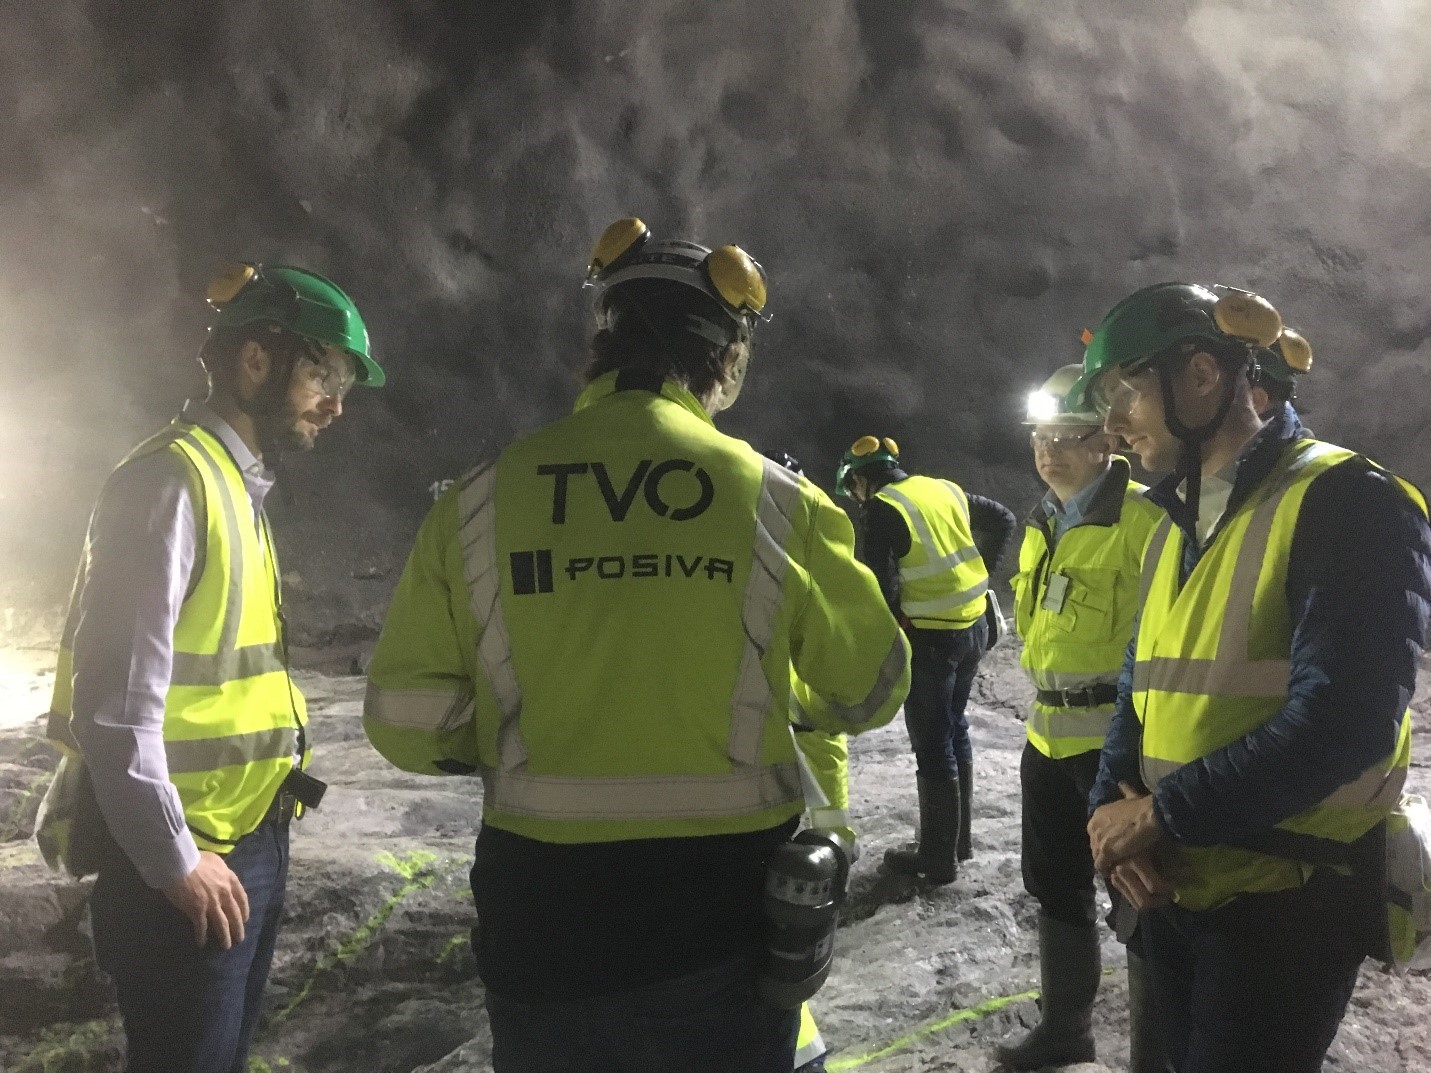 Chris Boyle (left), NWMO Director of Engineering, and Mark Gobien (right), Safety Assessment Models Section Manager, tour the Posiva project in Finland, along with Arto Laikari, a senior scientist involved with the project.